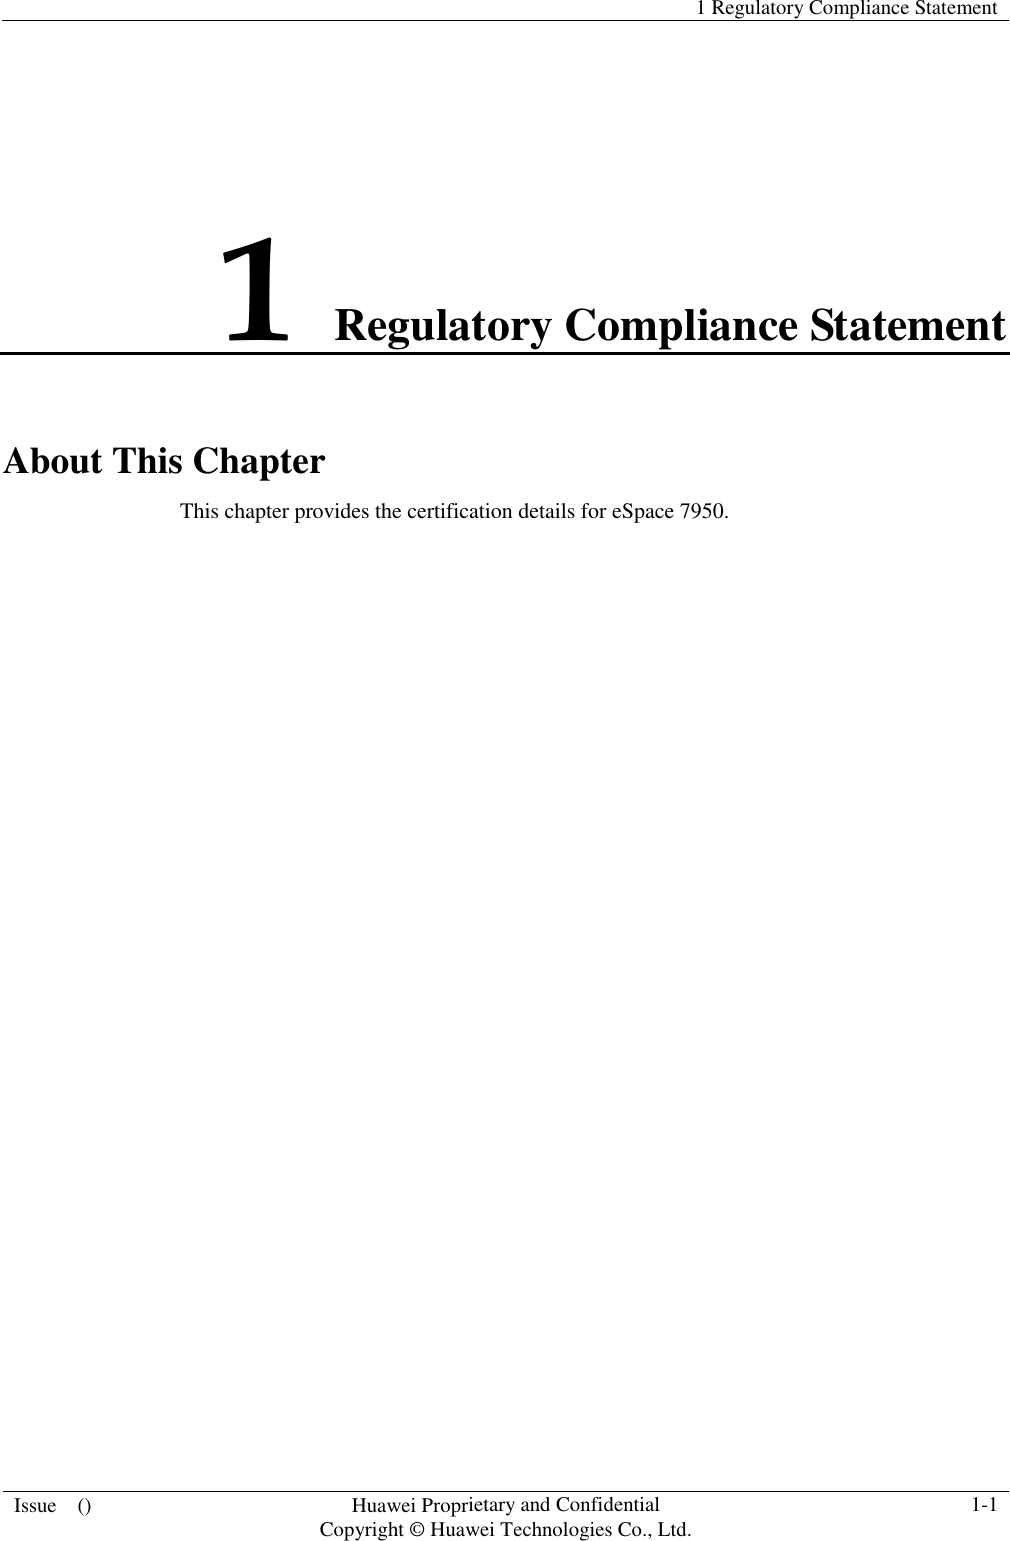    1 Regulatory Compliance Statement  Issue    ()  Huawei Proprietary and Confidential                                     Copyright © Huawei Technologies Co., Ltd.  1-1  1 Regulatory Compliance Statement About This Chapter This chapter provides the certification details for eSpace 7950.  